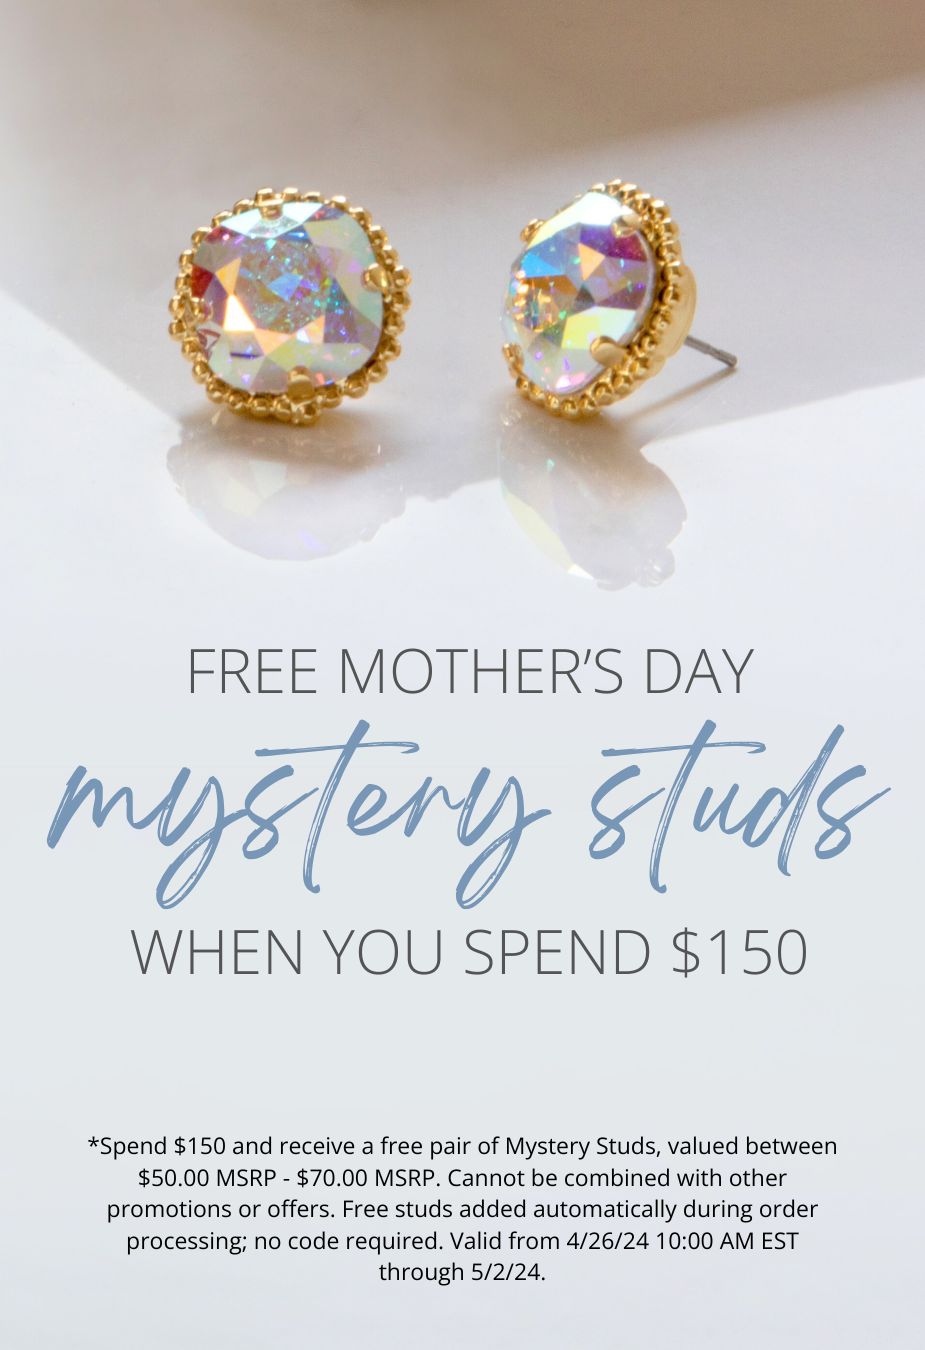 Free Mother's Day Mystery Studs when you spend $150! *Spend $150 and receive a free pair of Mystery Studs, valued between $50.00 MSRP - $70.00 MSRP. Cannot be combined with other promotions or offers. Free studs added automatically during order processing; no code required. Valid from 4/26/24 10:00 AM EST through 5/2/24.